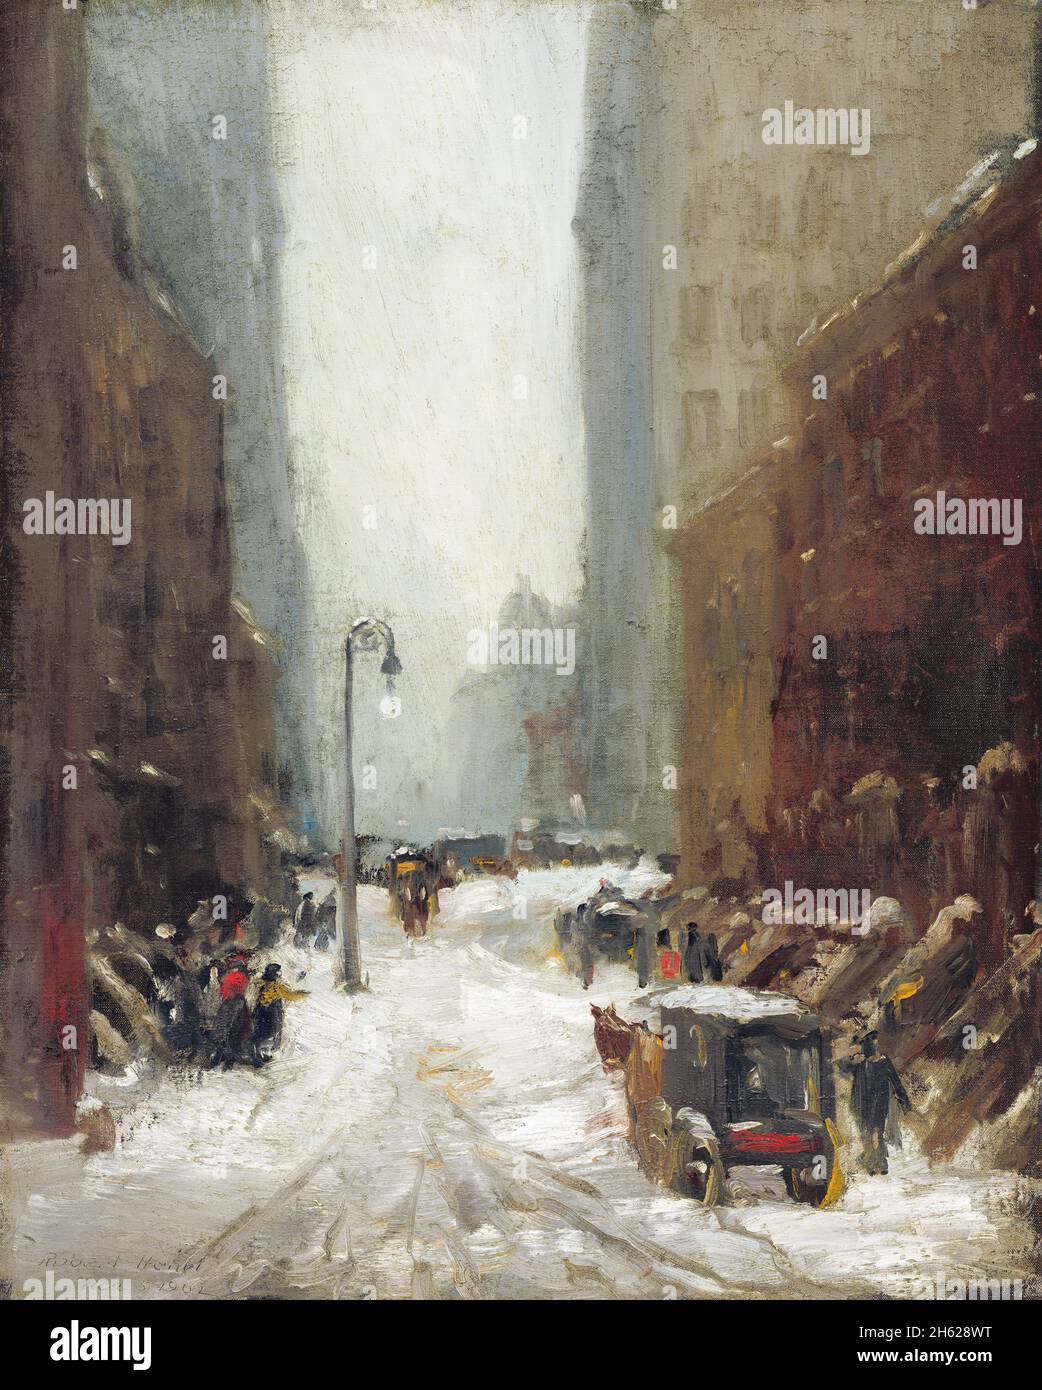 Snow in New York by Robert Henri (1865-1929), oil on canvas, 1902 Stock Photo